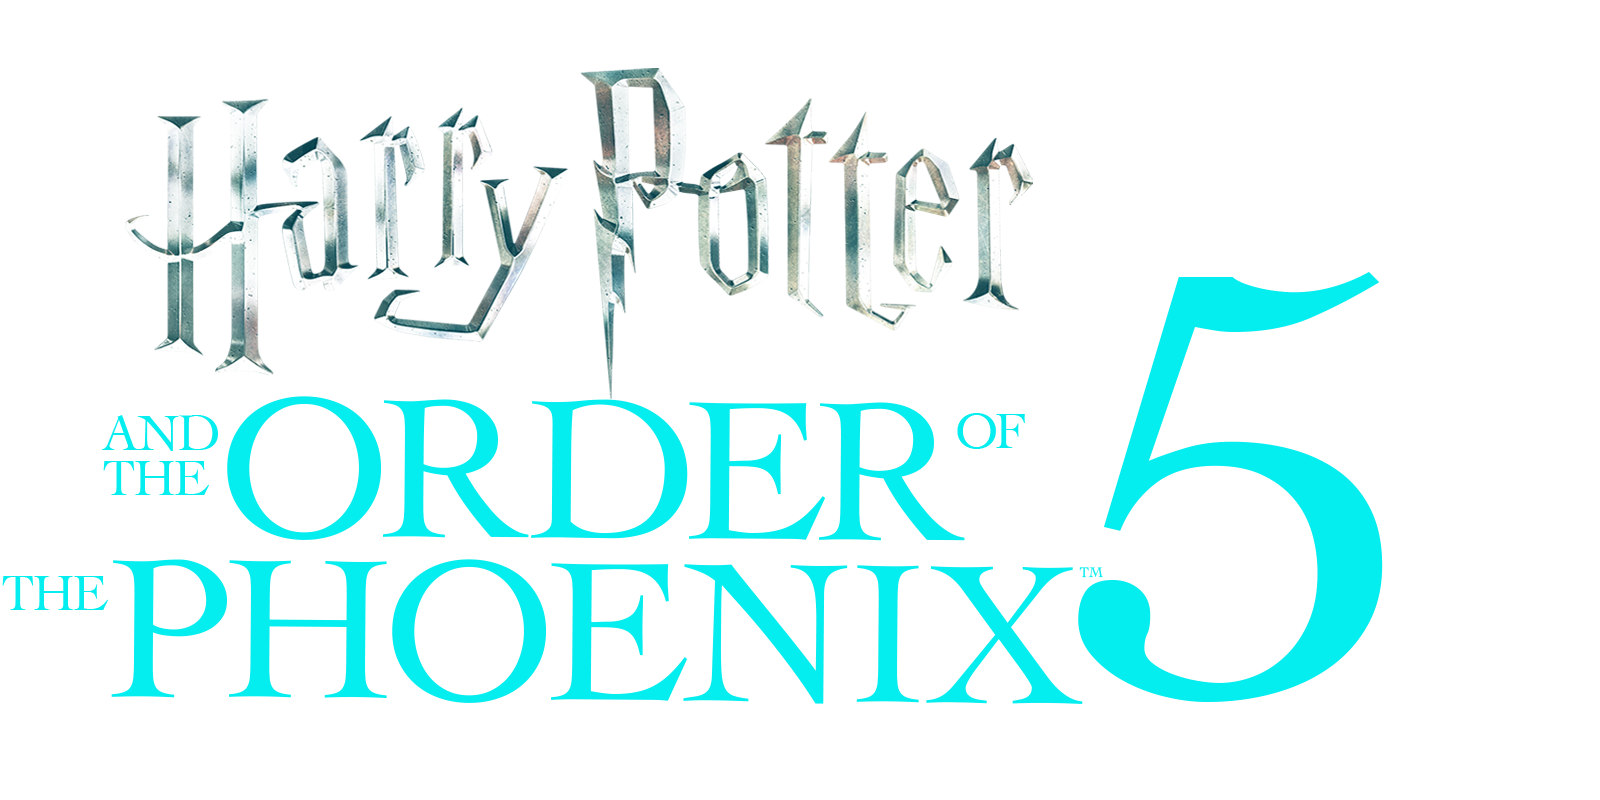 harry potter order of the phoenix movie online free